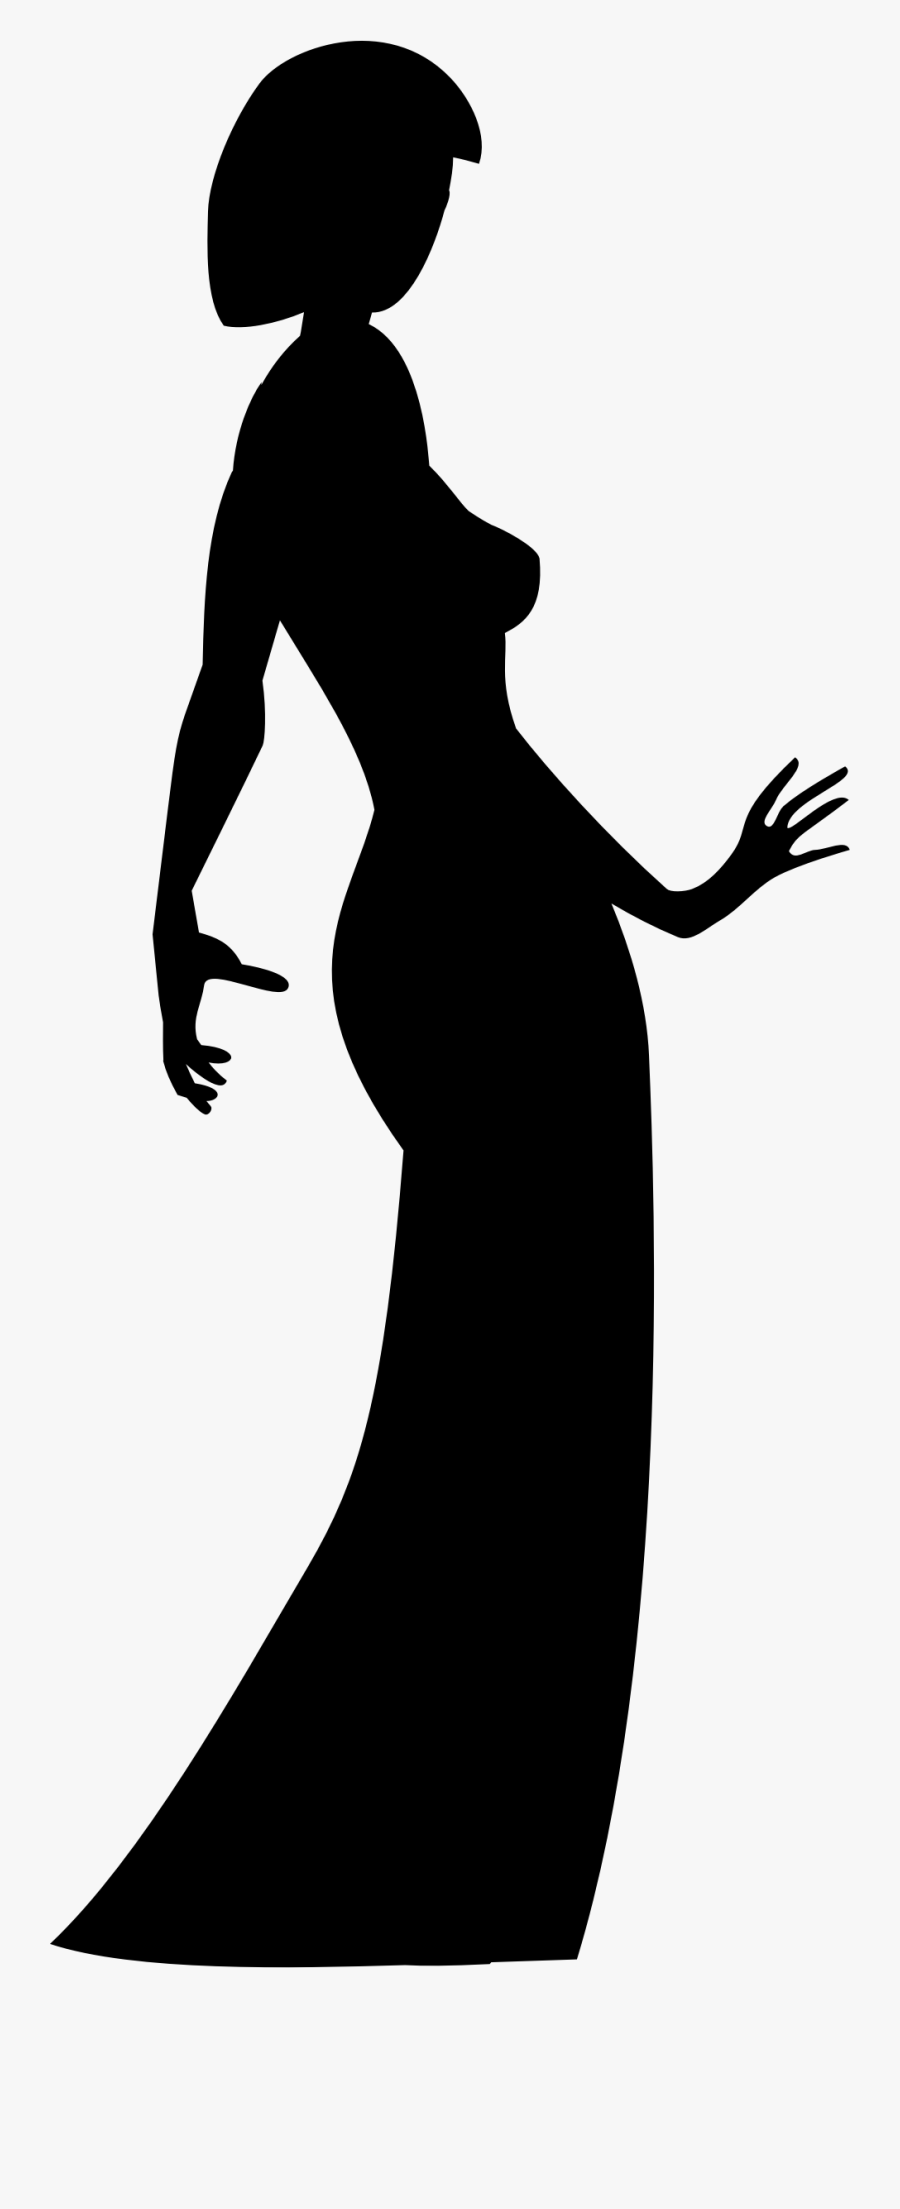 Clipart Free Download Clipart Woman In Dress Big Image - Women On Dress Silhouette, Transparent Clipart